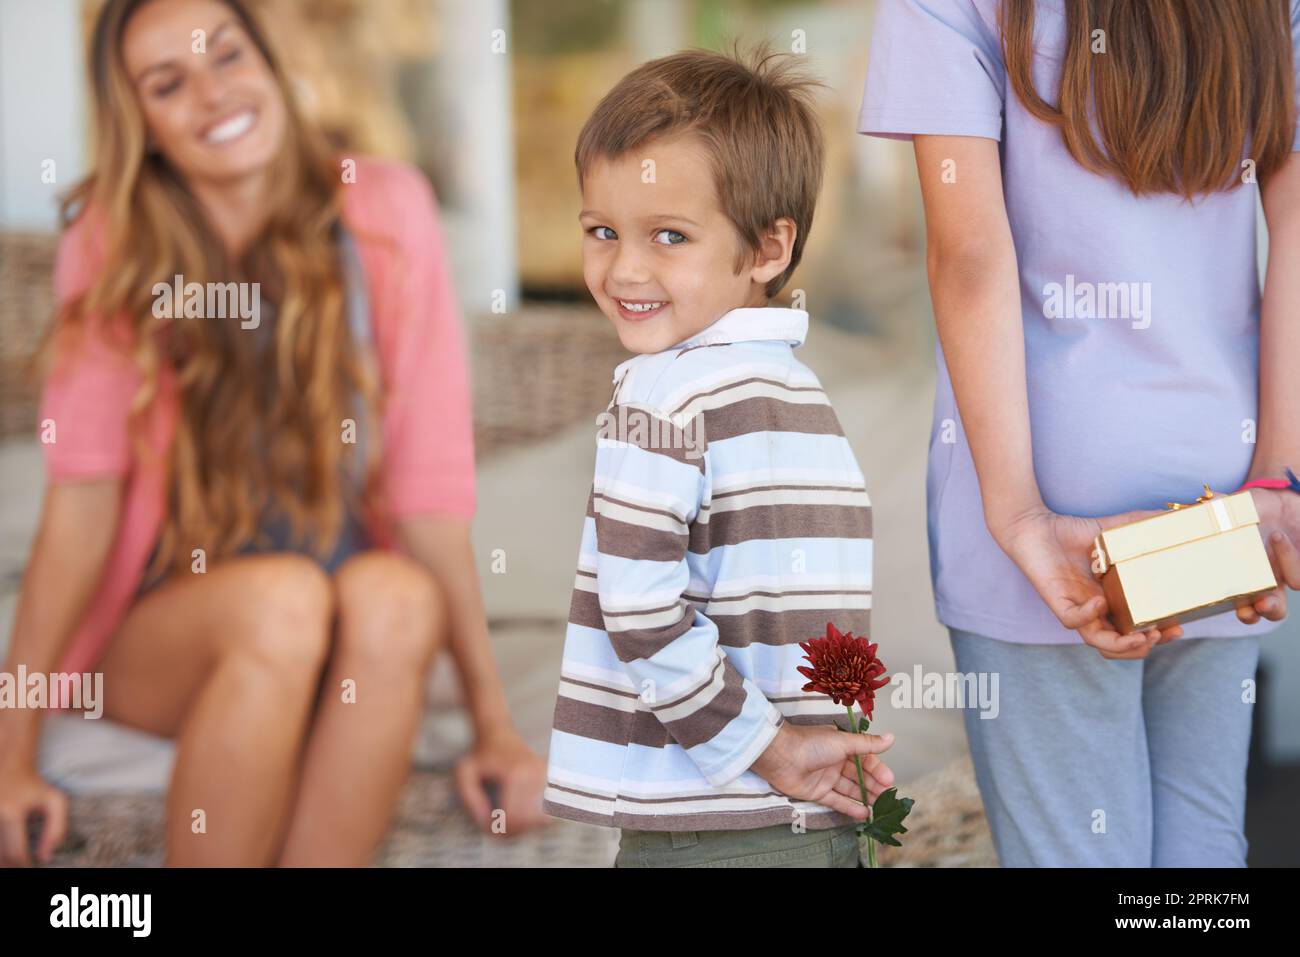 https://c8.alamy.com/comp/2PRK7FM/for-the-best-mom-ever-a-mother-and-her-two-children-holding-gifts-for-mothers-day-2PRK7FM.jpg